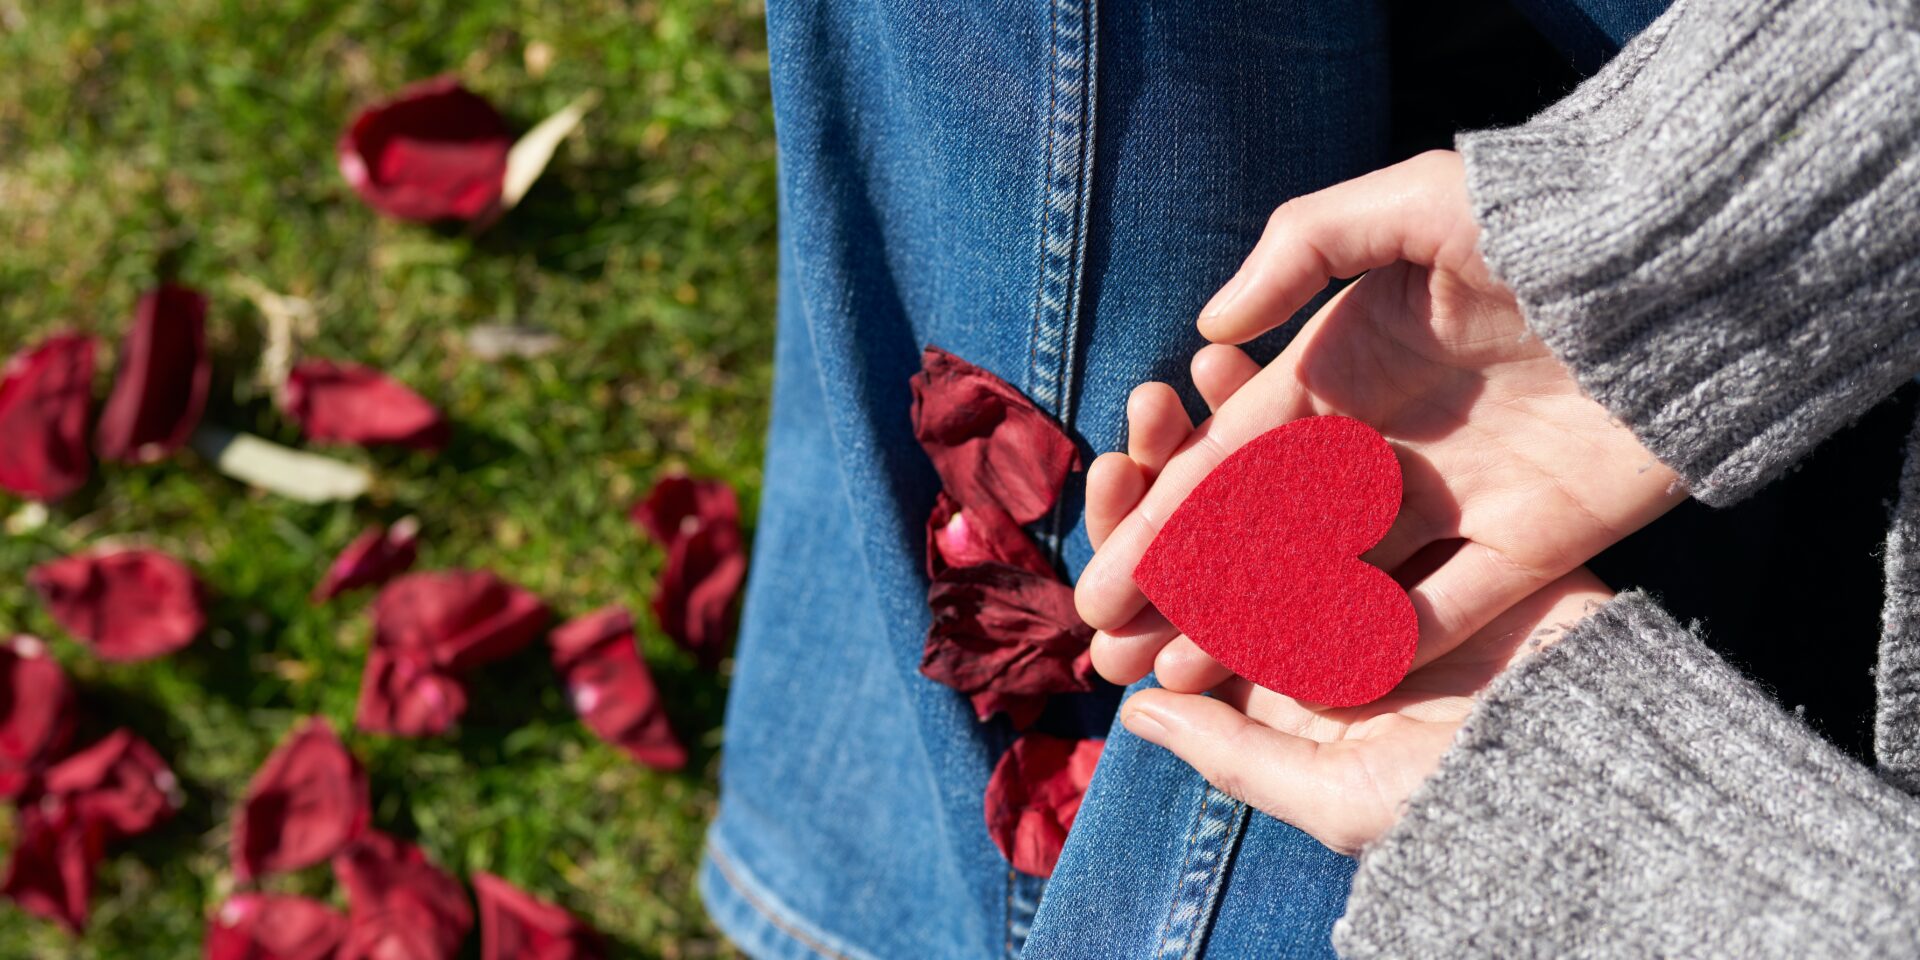 A close up of a person holding a heart. This could represent the bonds cultivated through online therapy for asian americans. Learn more about the support an Asian American therapist in Los Angeles can offer by searching for an Asian American therapist near me today.